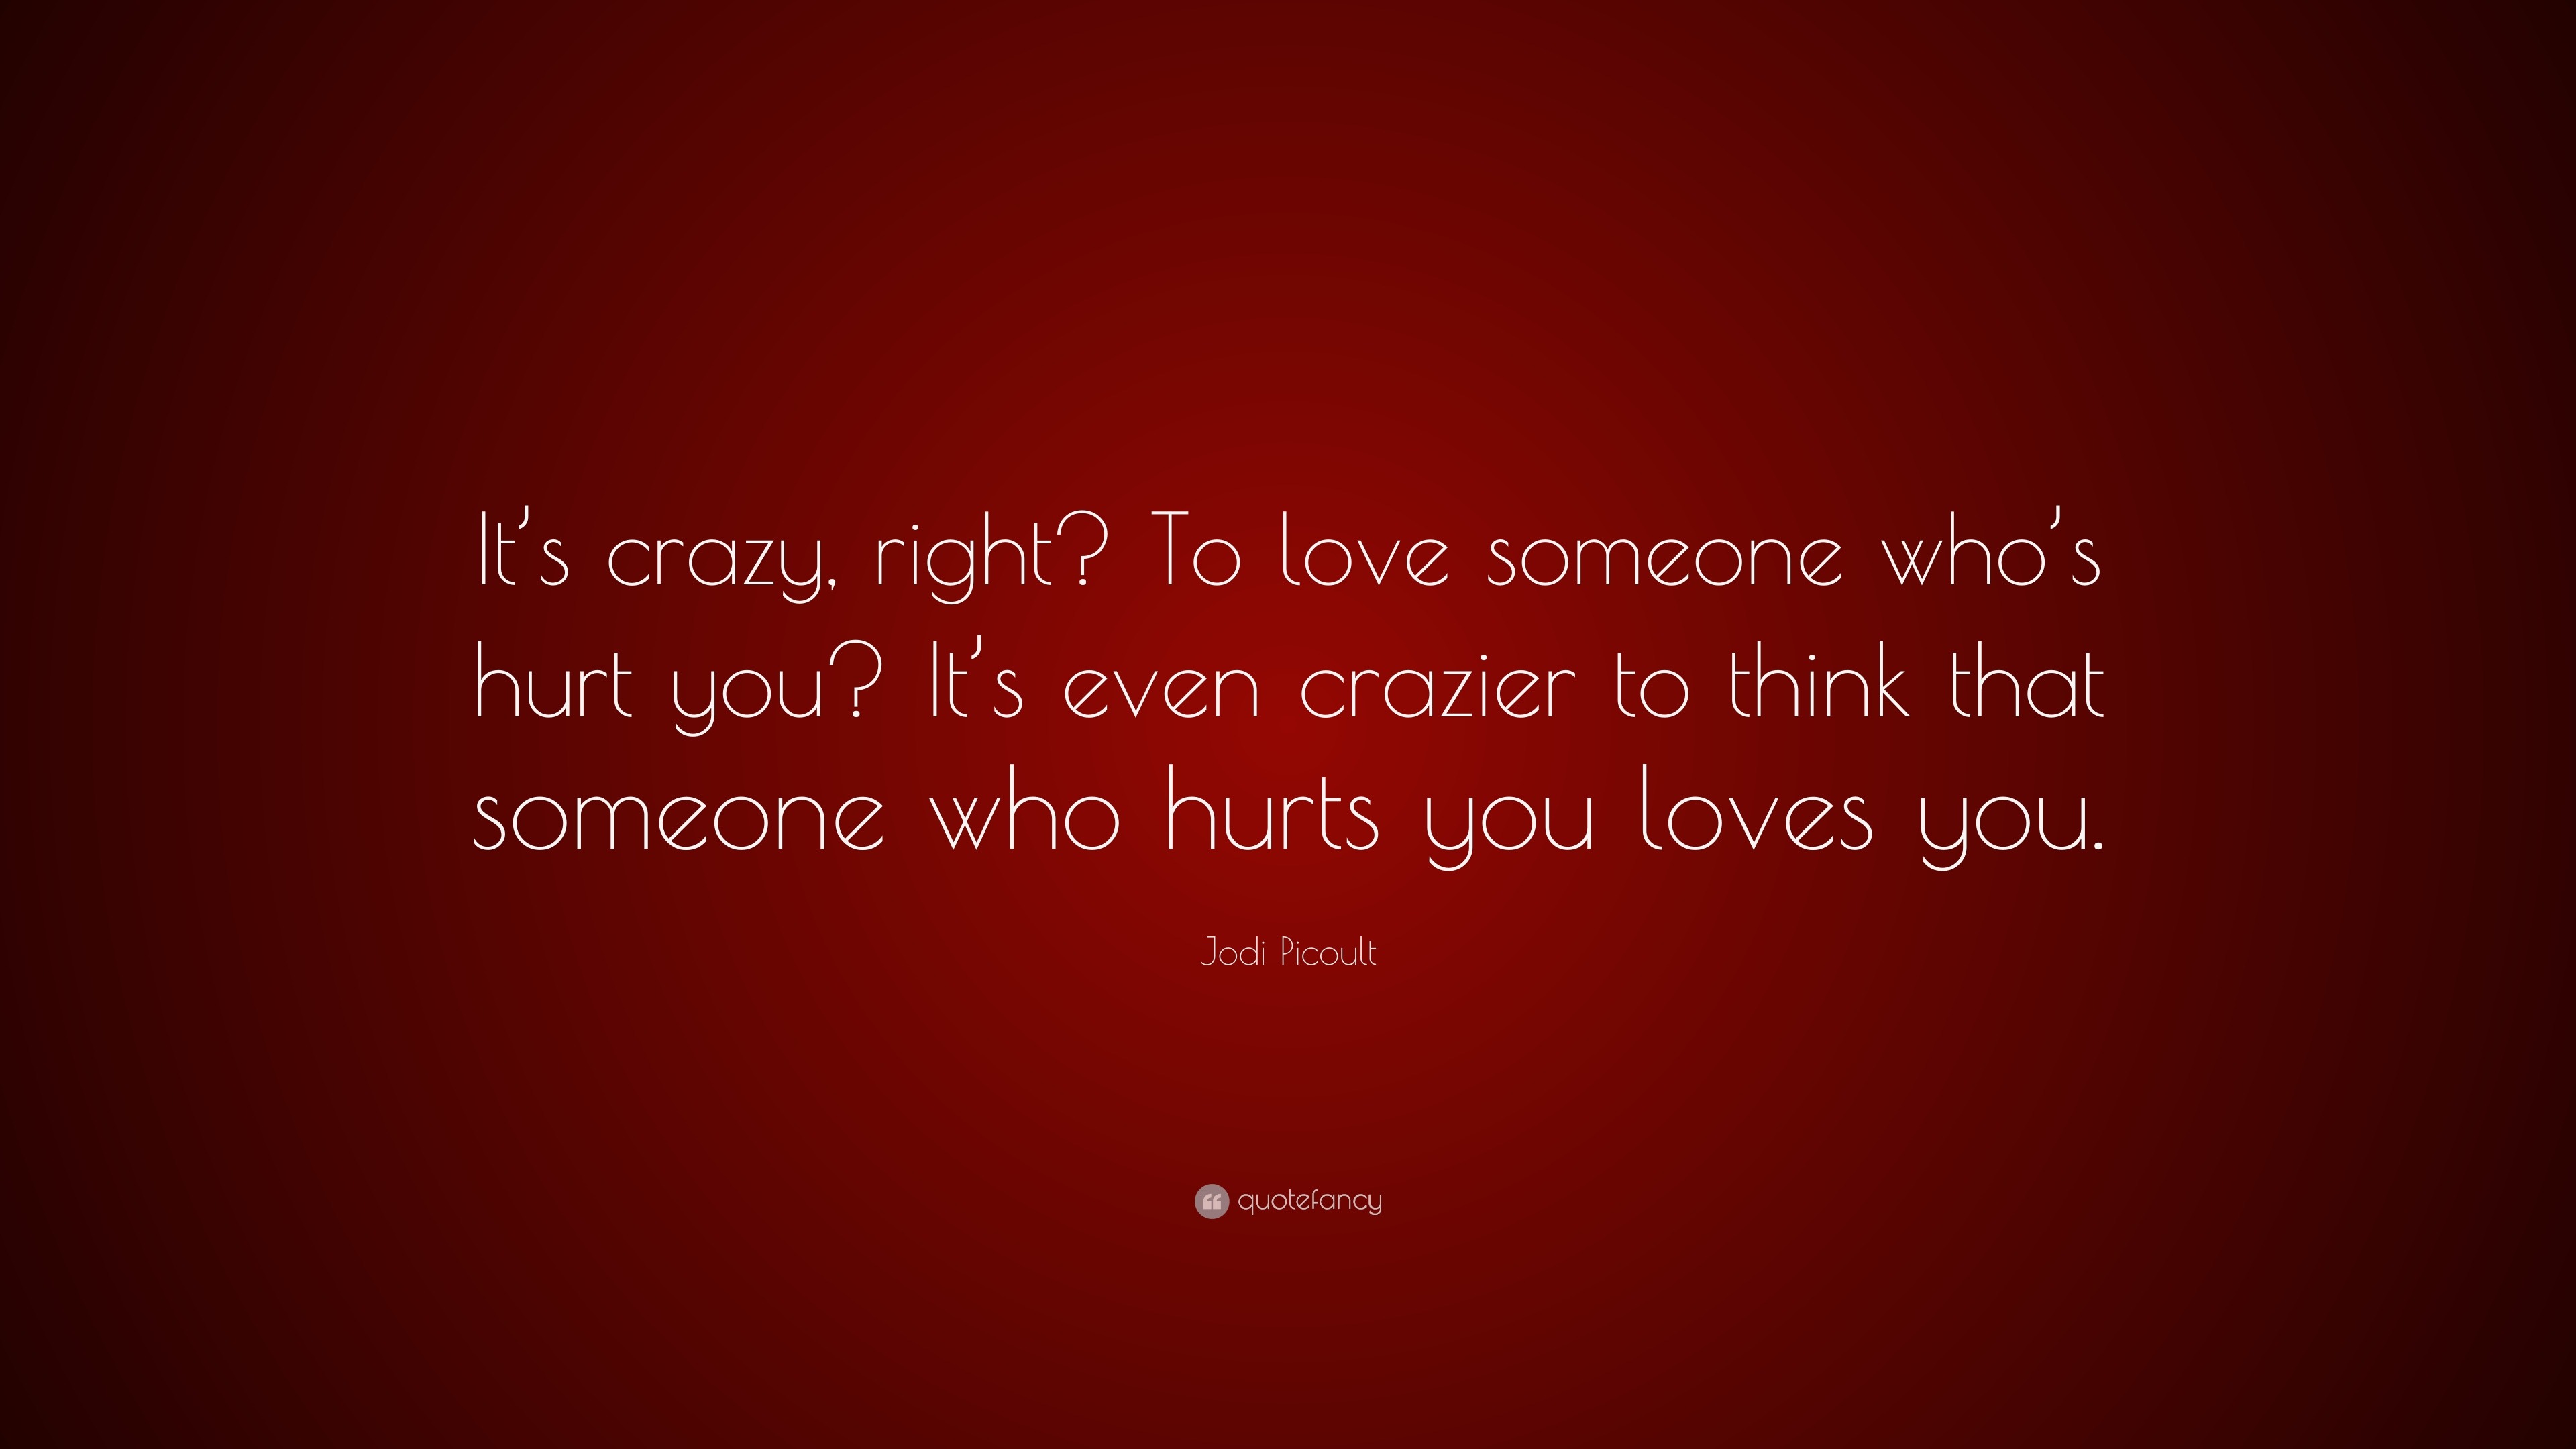 Jodi Picoult Quote “It s crazy right To love someone who s hurt you